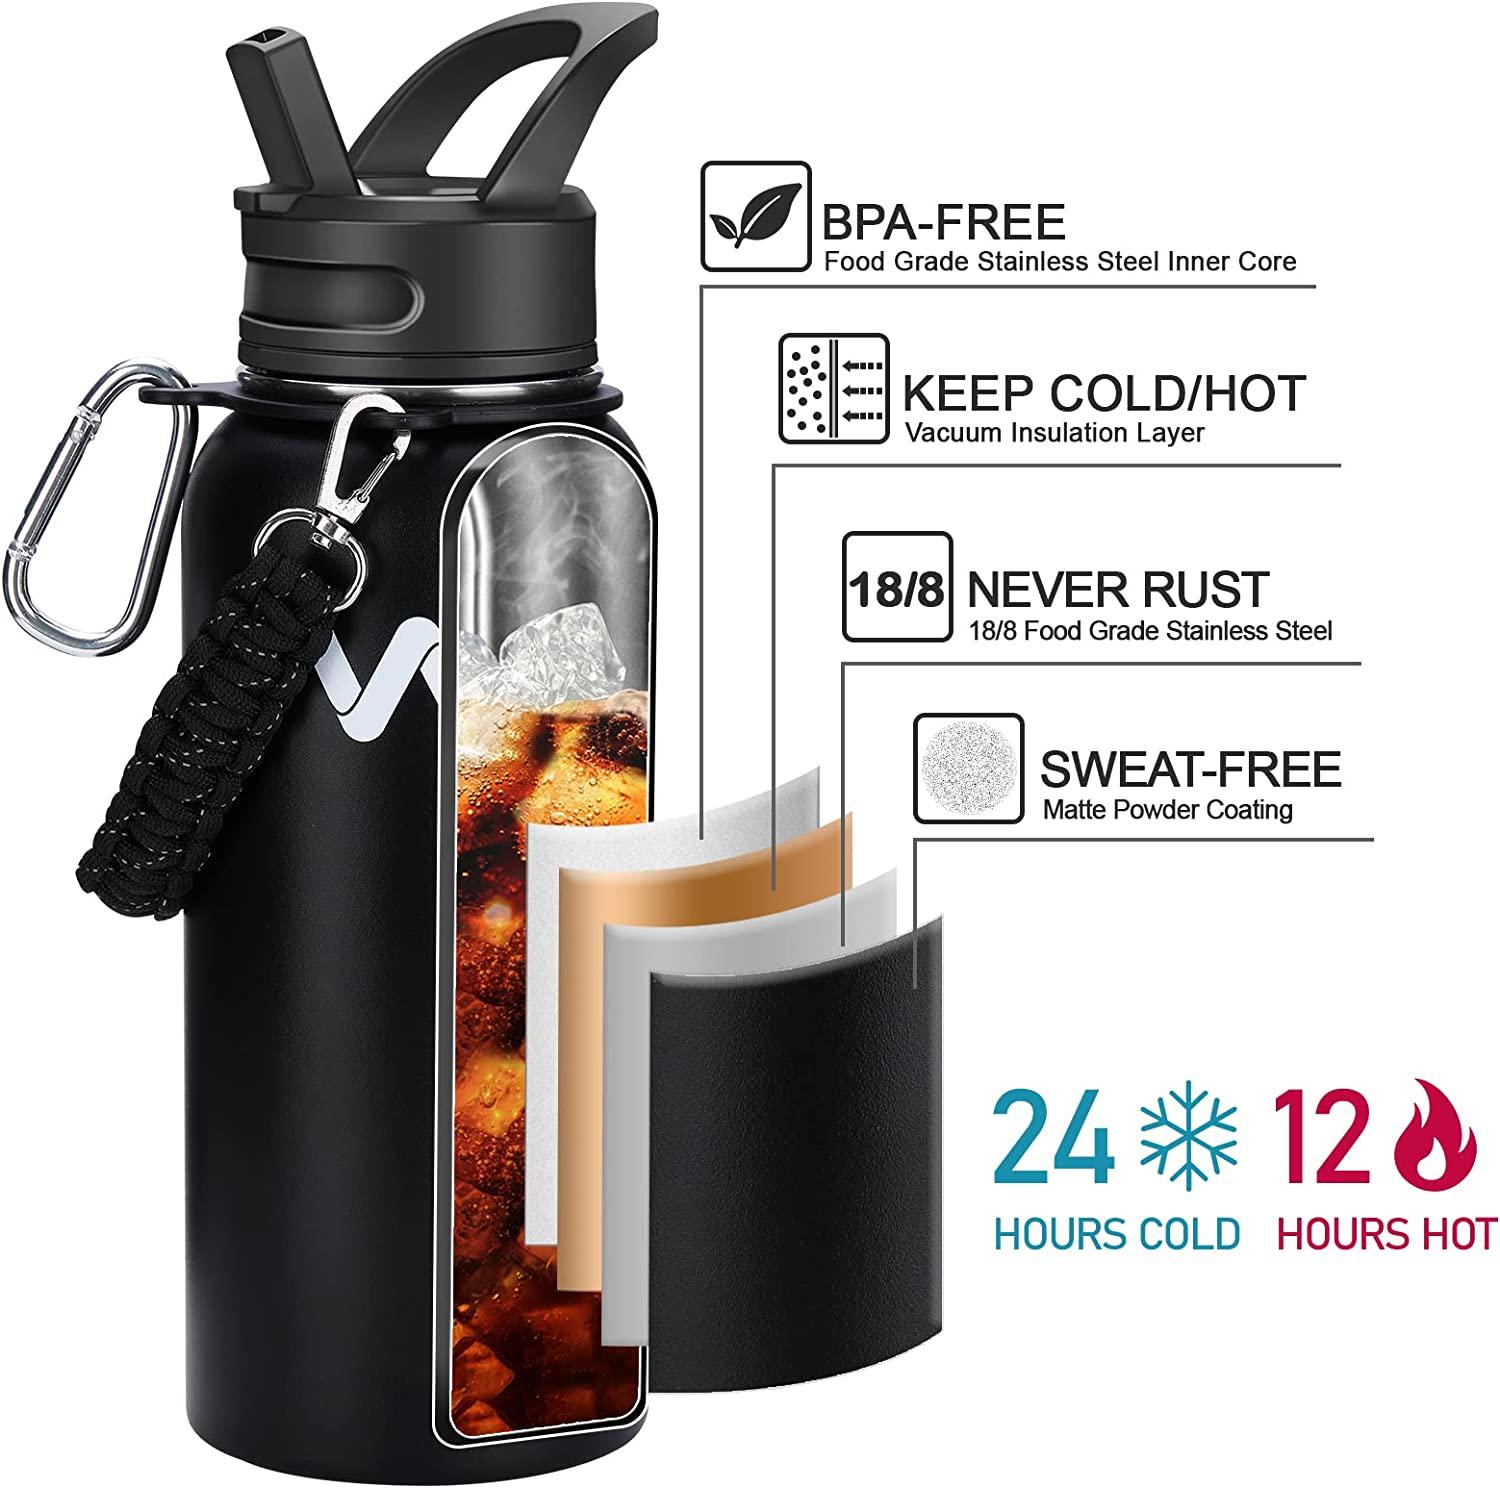 24 Oz. Banded Gripper Water Bottle With Straw